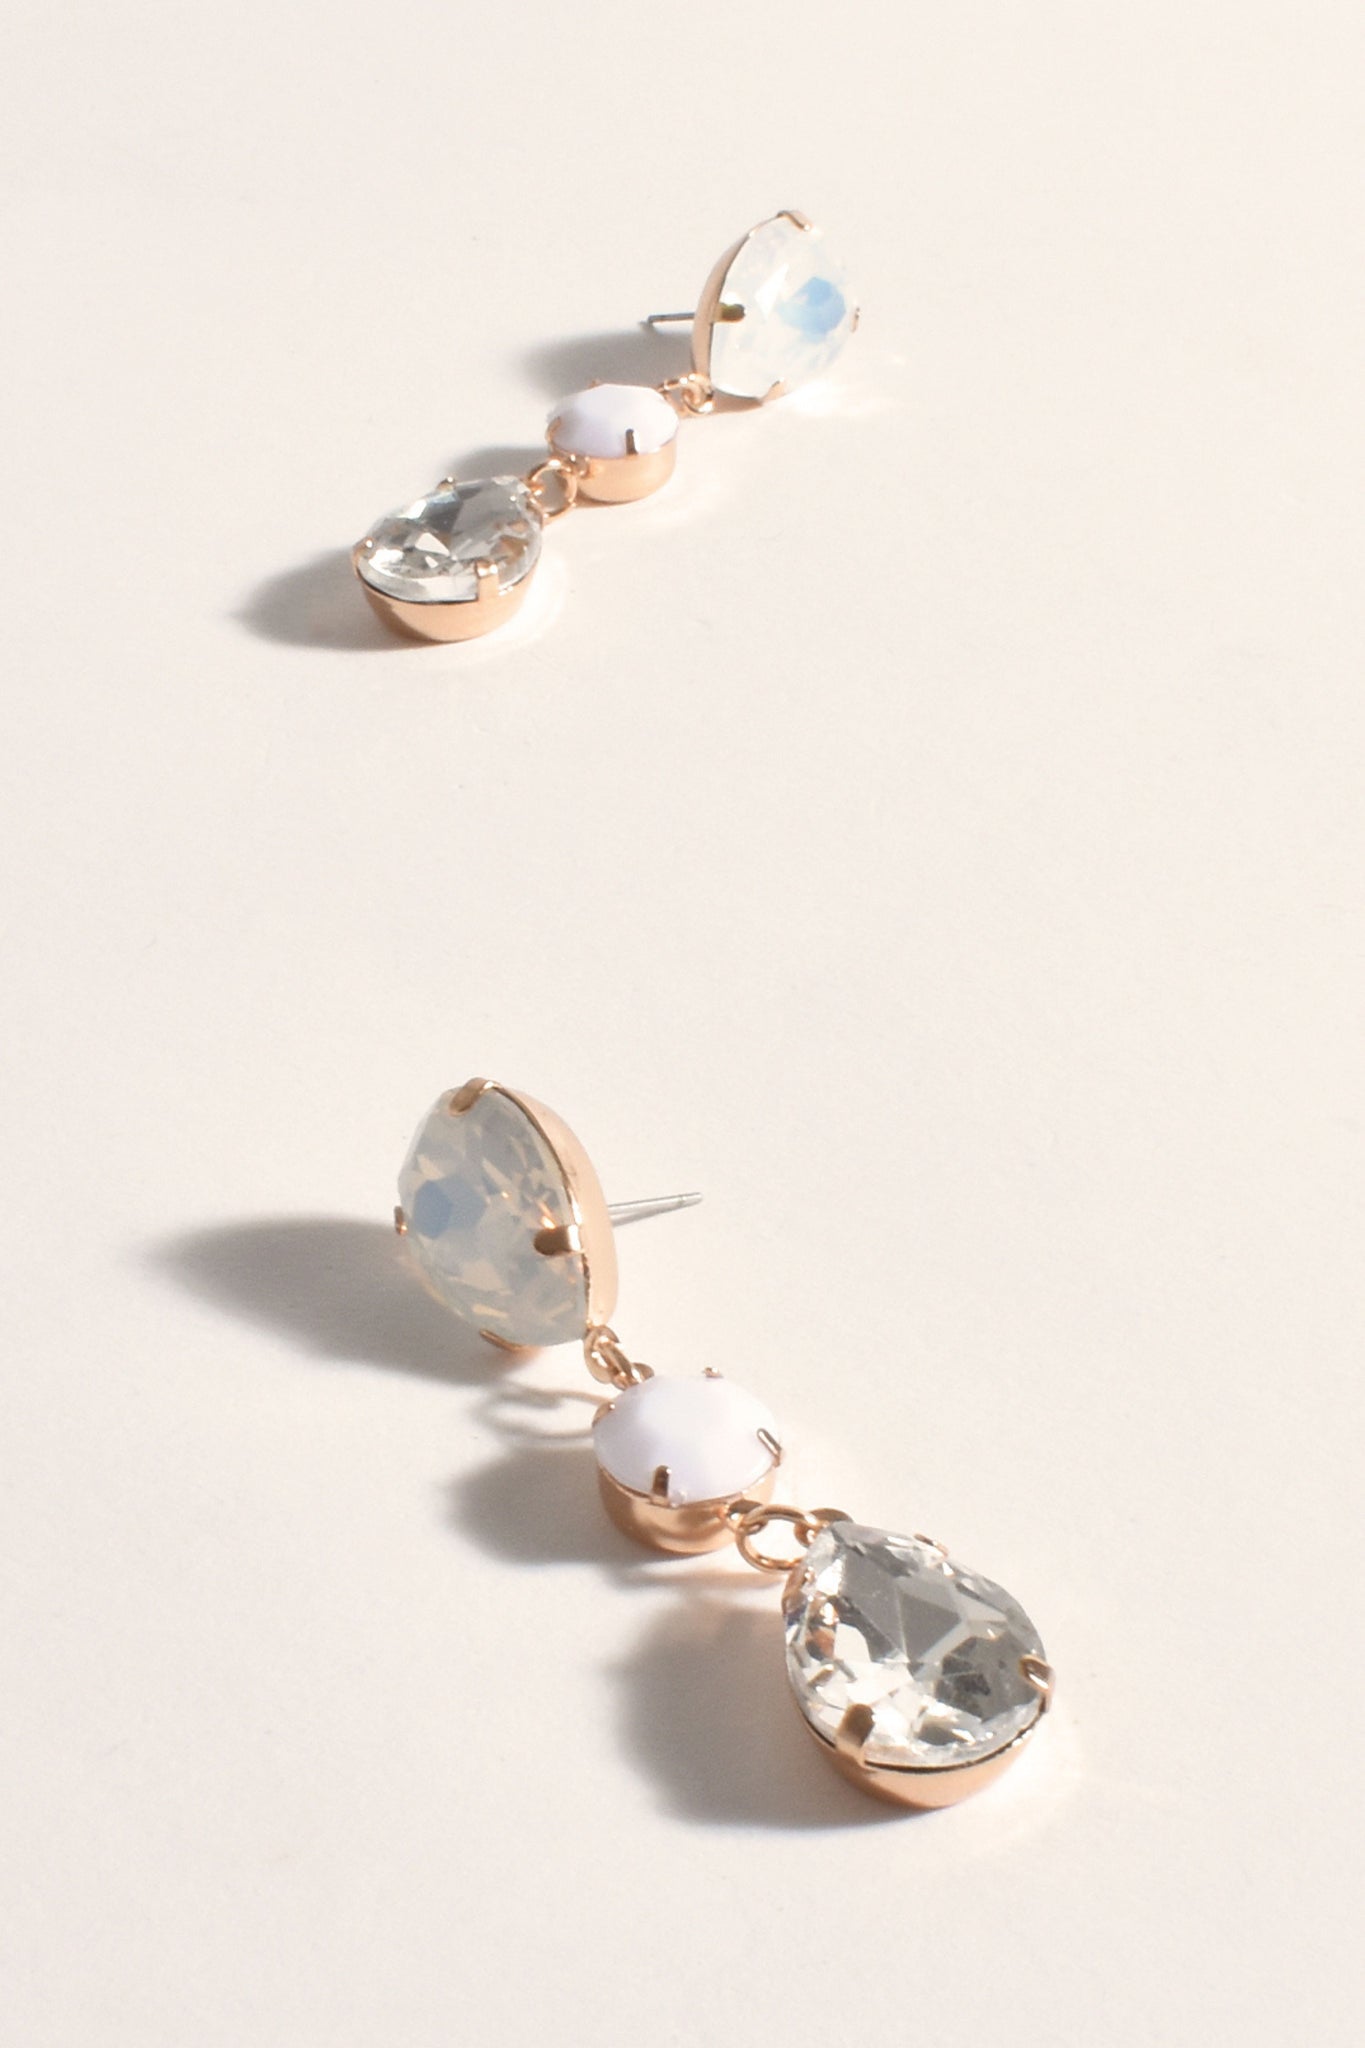 Stone and Glass Event Earrings - White Crystal